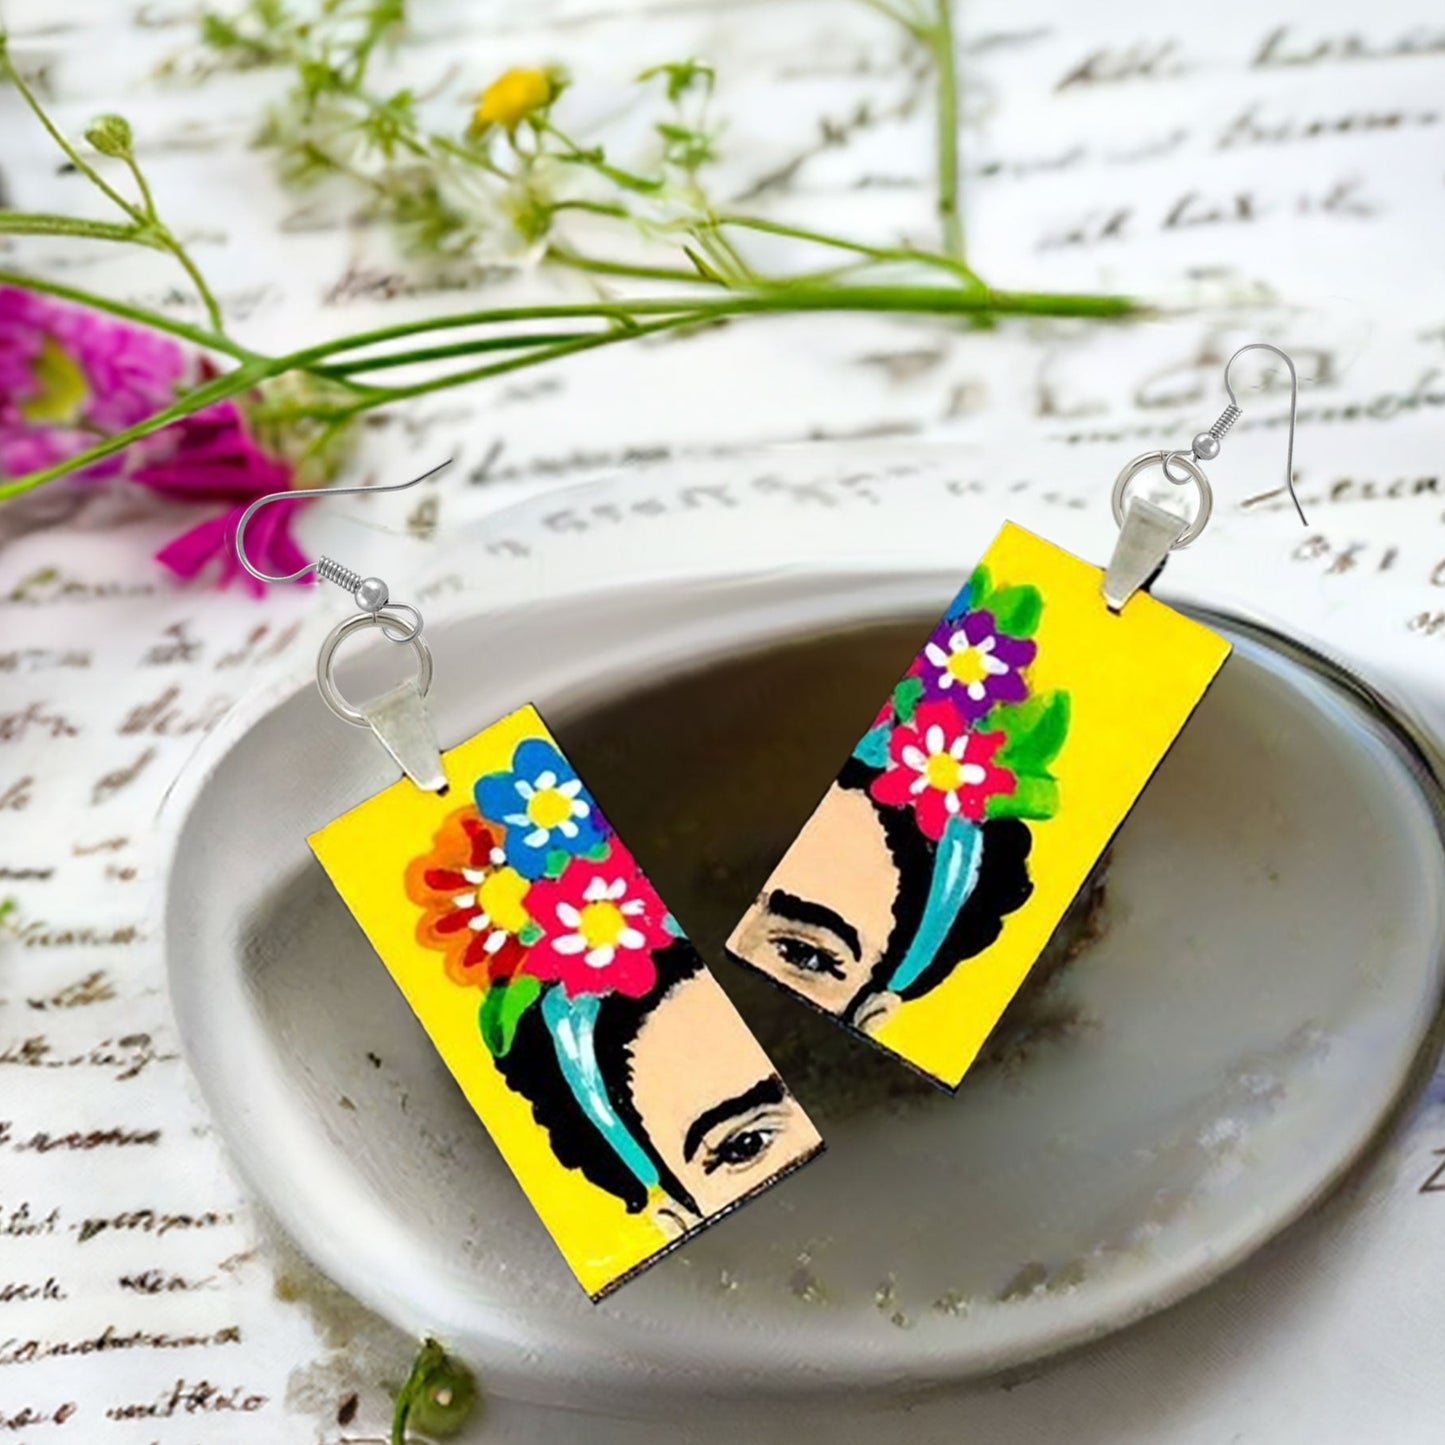 Vivid Frida Kahlo inspired floral earrings painted by hand by Mexican artisan. Mexico folk art to wear for women and girls. Mexico jewelry. Mexican earrings. Frida fans. Mexicanias. Fridamaniacs. Fridalovers. Great gift idea young girls.